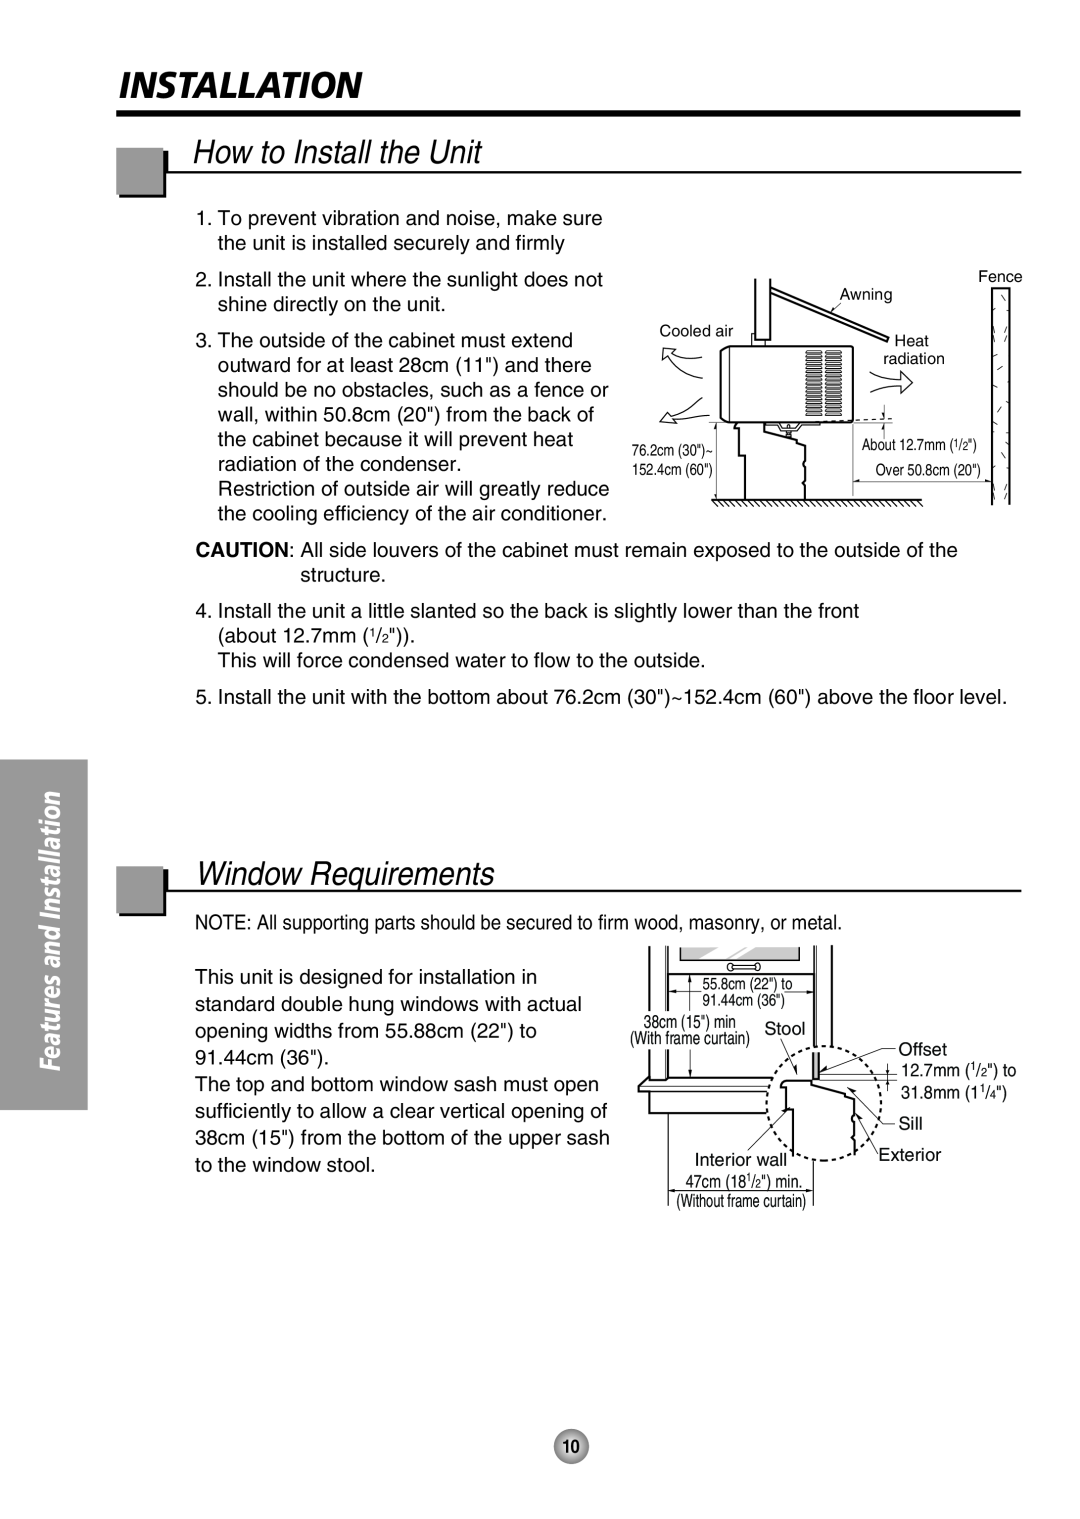 Panasonic CW-XC80HU manual How to Install the Unit, Window Requirements, and Installation, Features 